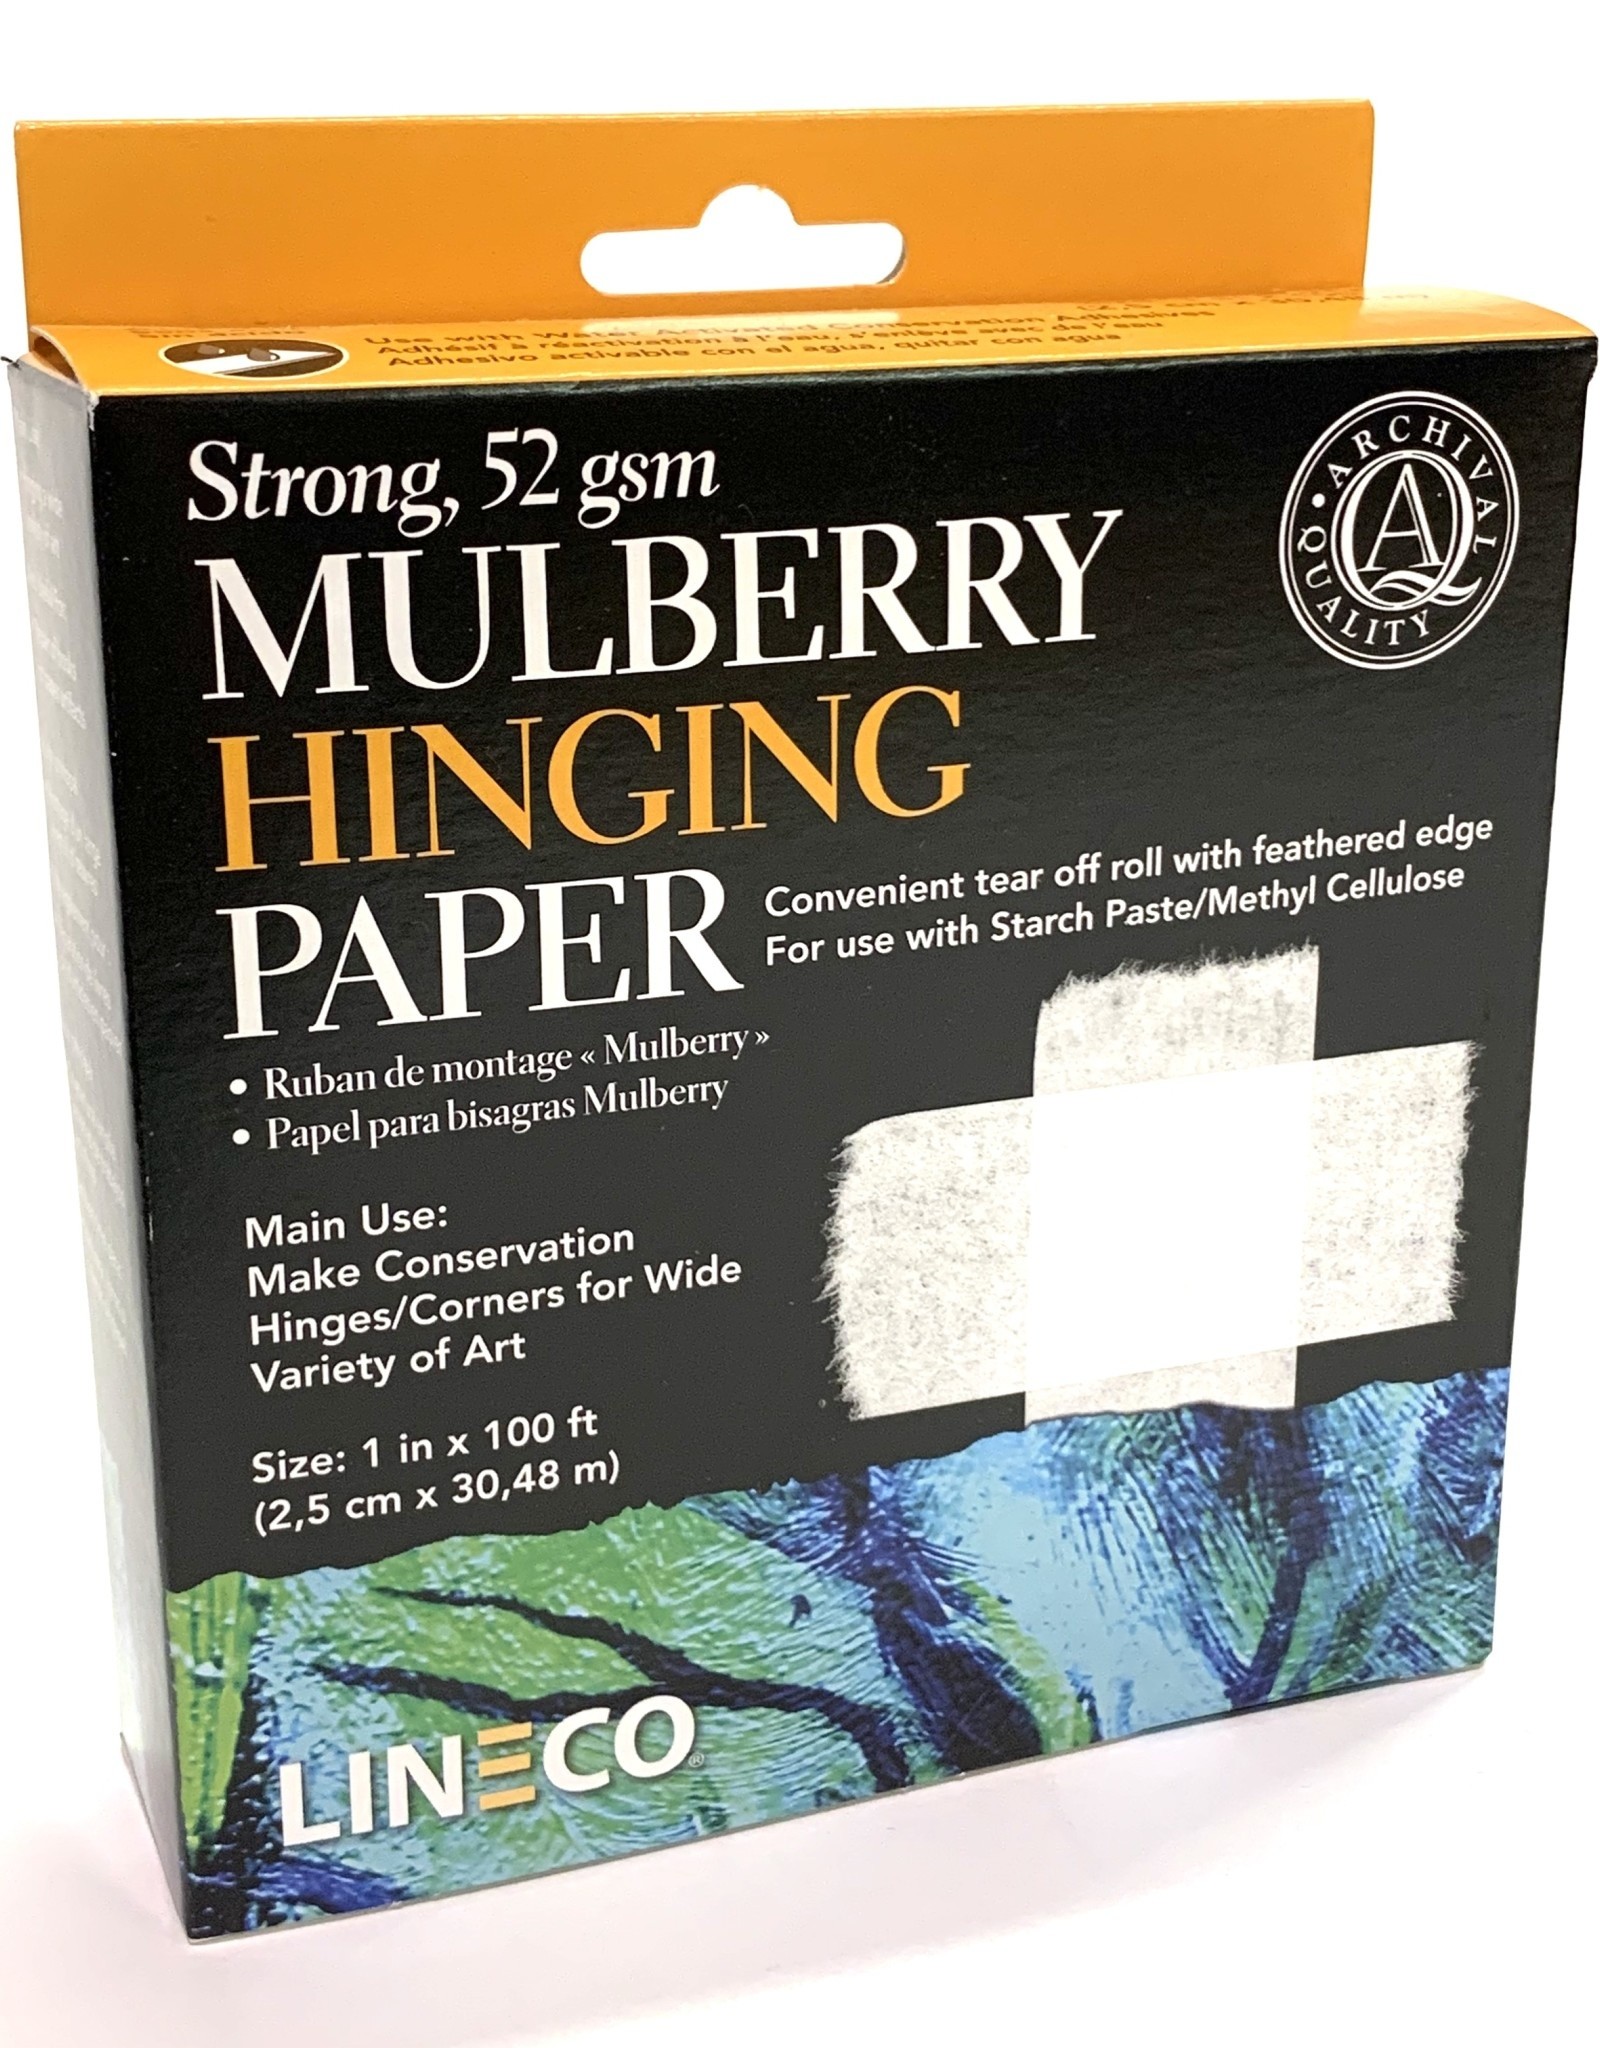 Mulberry Hinging Tape, 1" x 100'